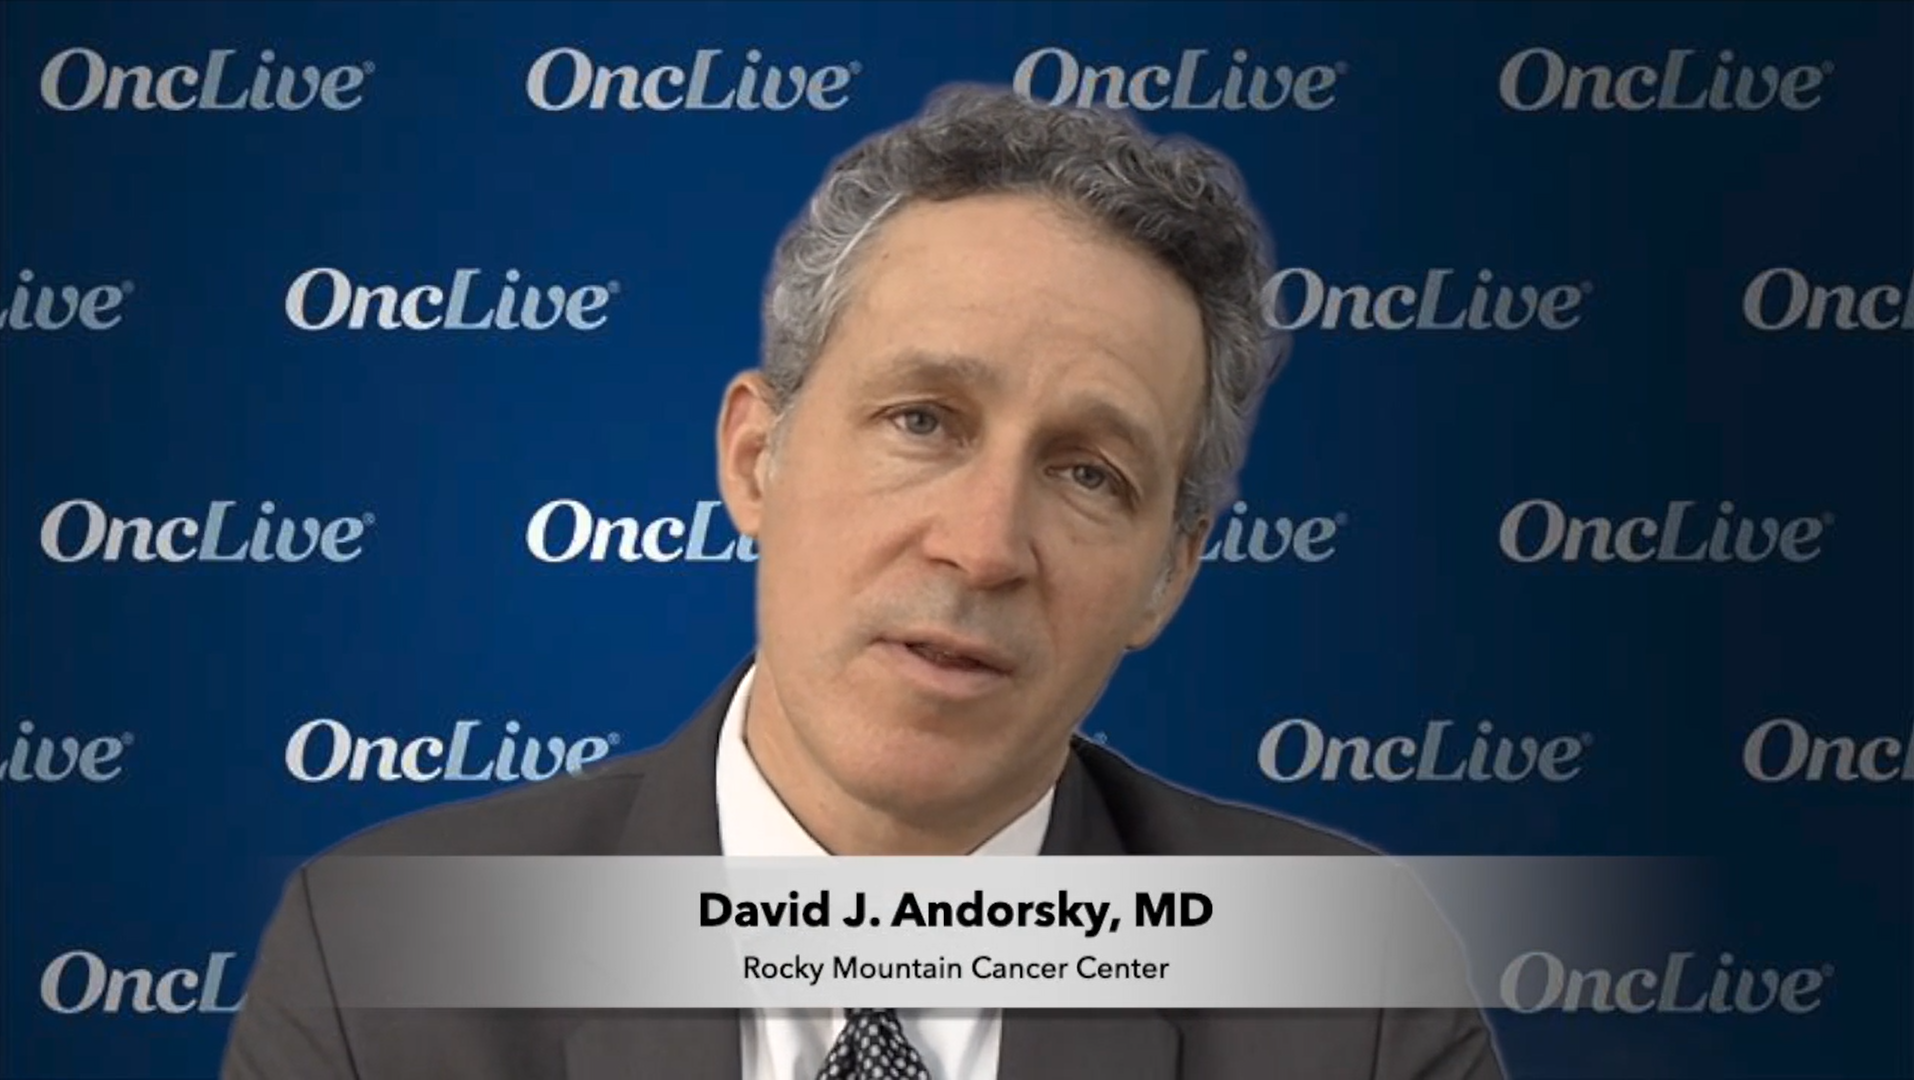 Real-World Treatment Patterns With BTK Inhibitors in CLL/SLL